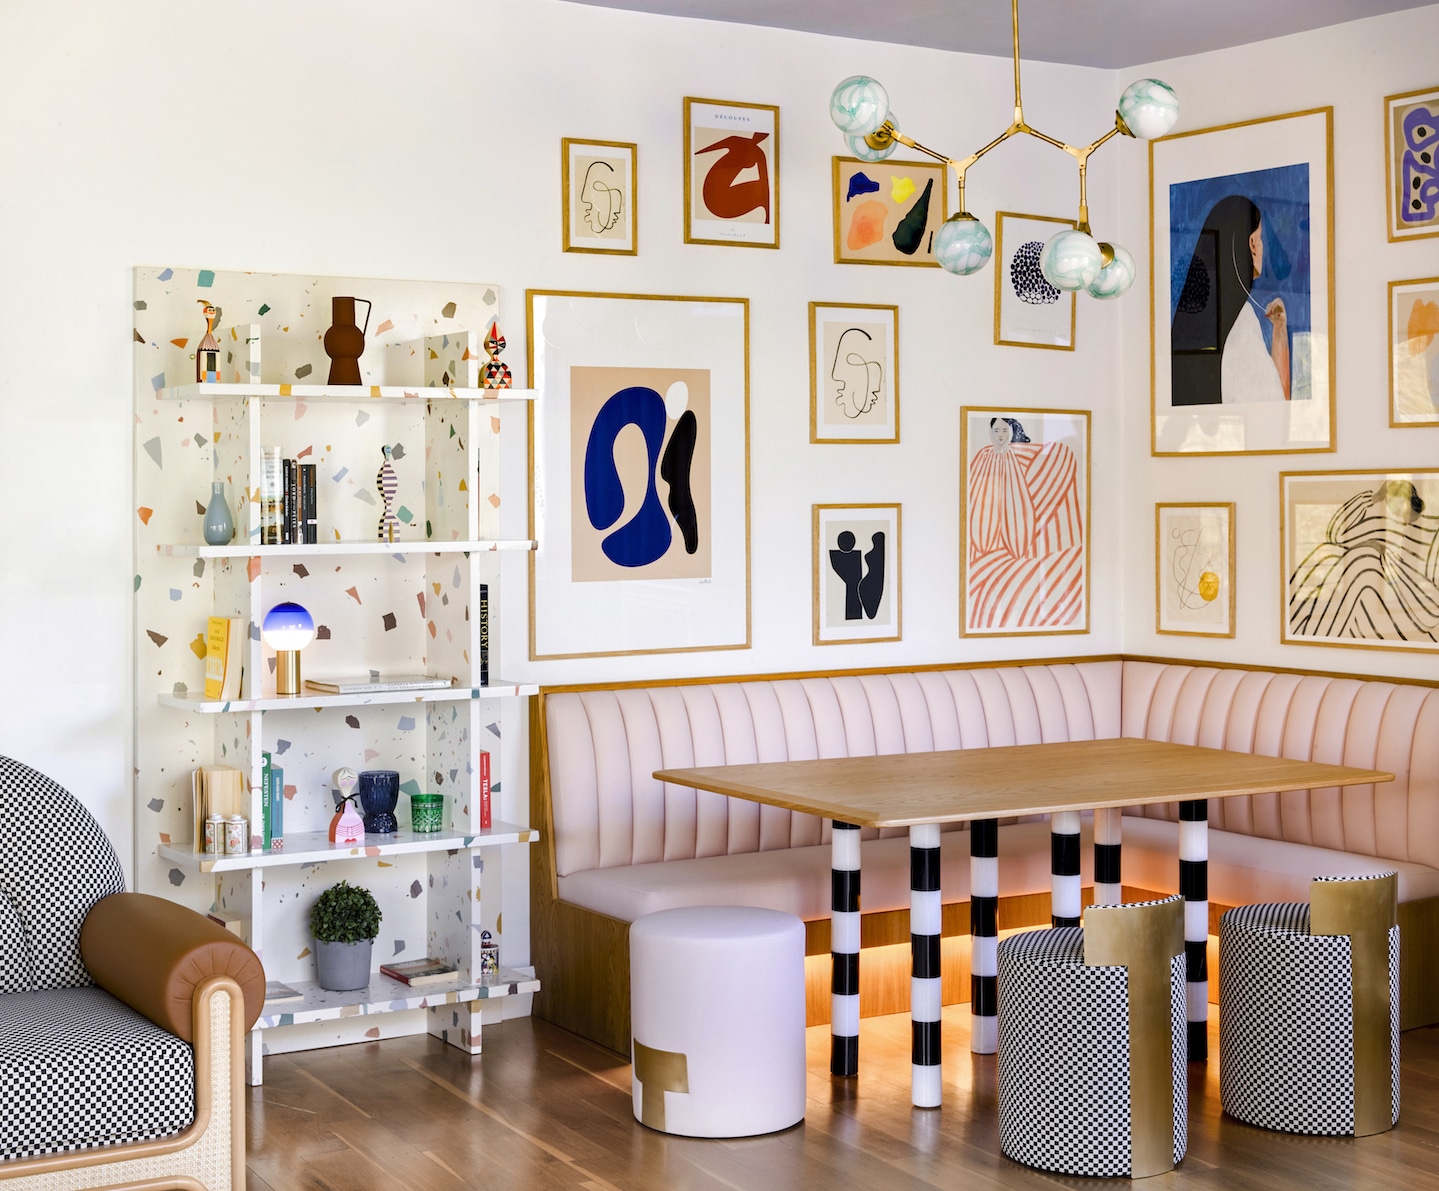 Merve Kahraman Maxed Out This Istanbul Pied-à-Terre with Her Own Daring Creations